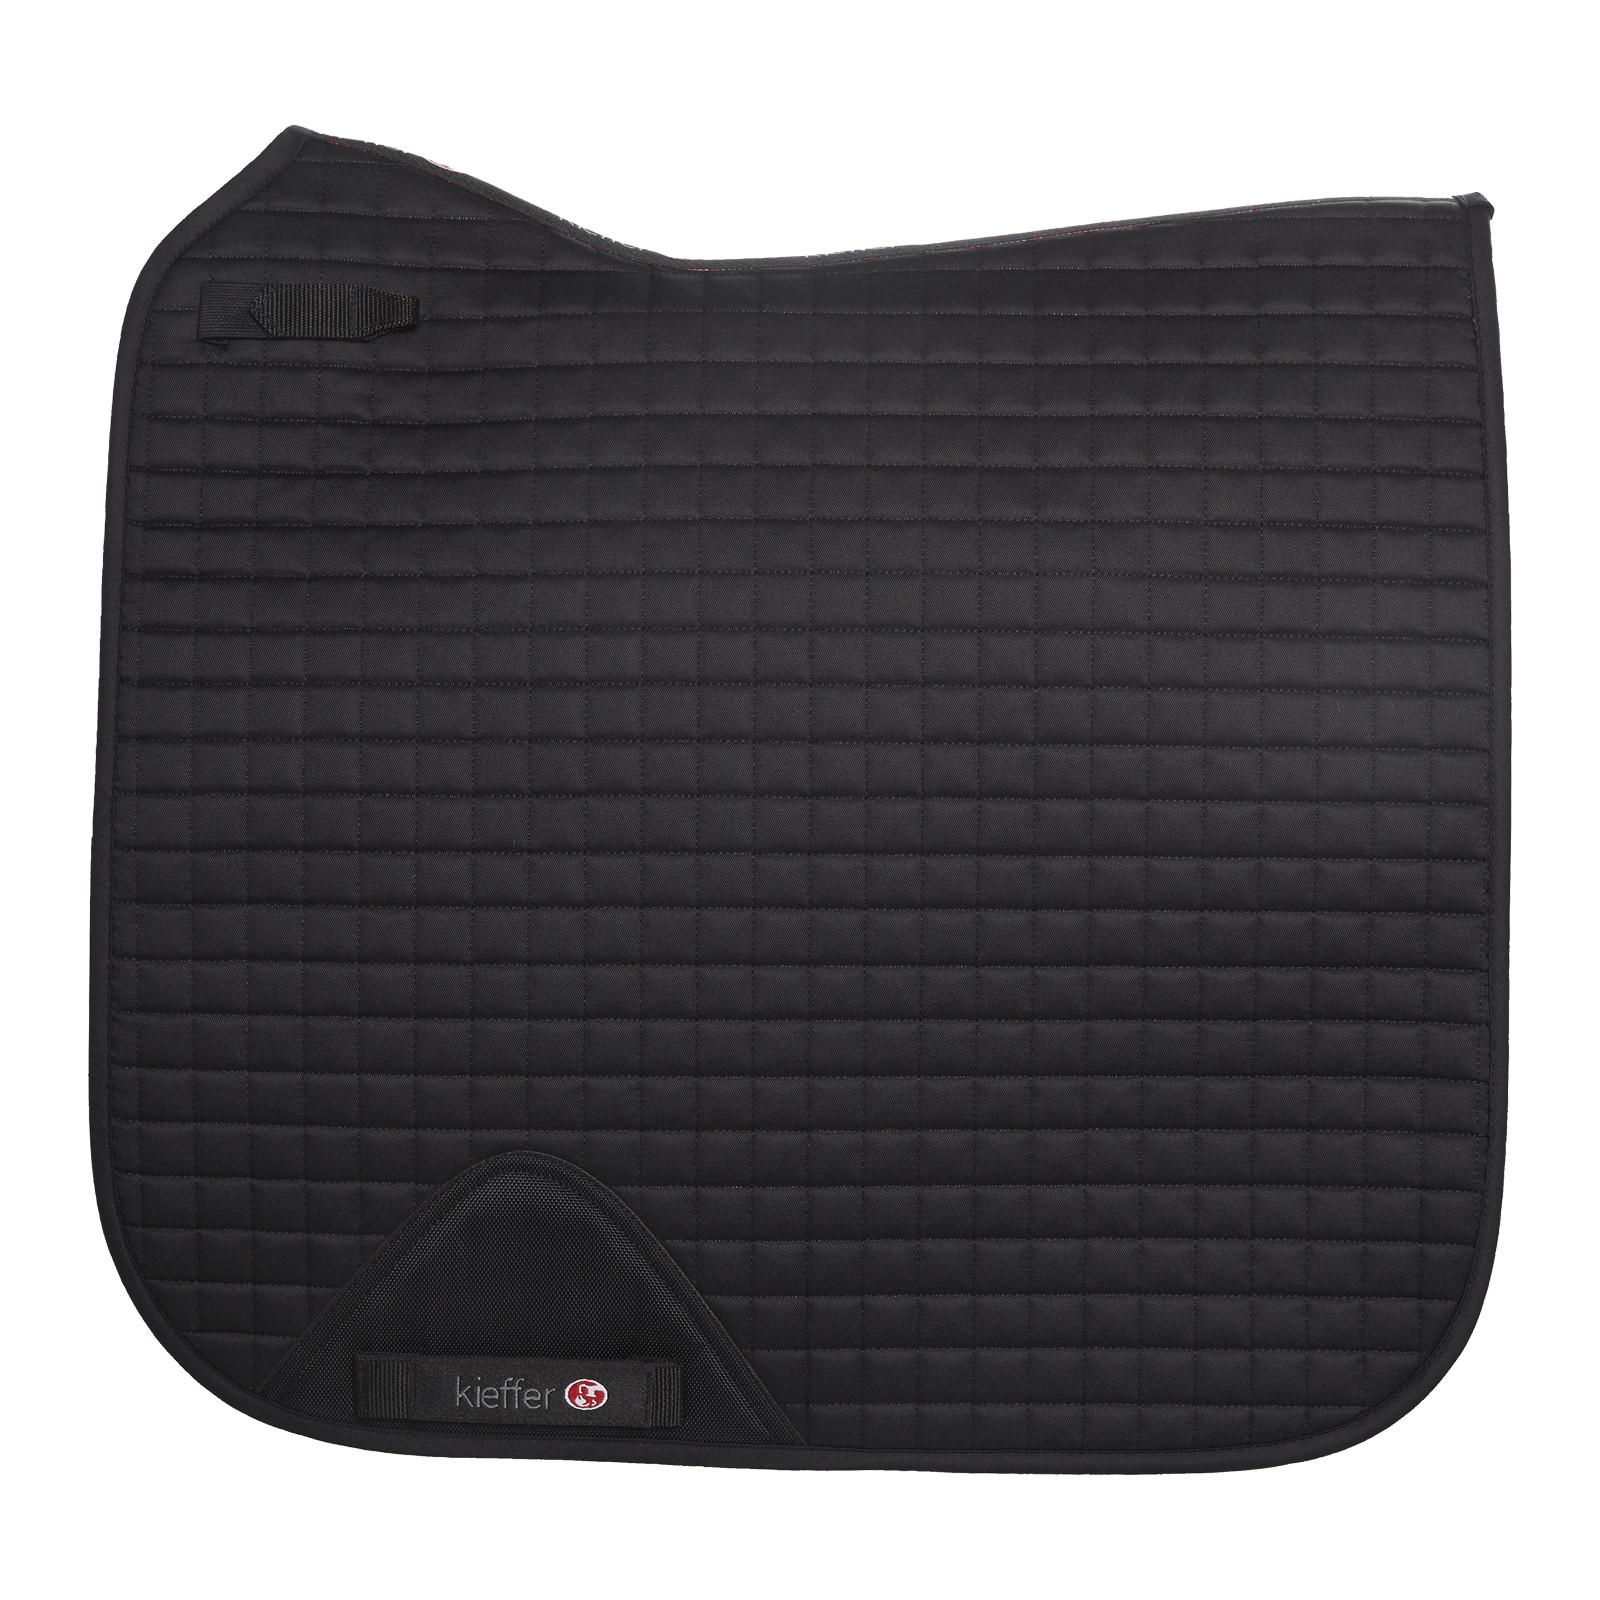 Full Quilted Cotton Saddle Cloth Protack Saddle Pad Black 